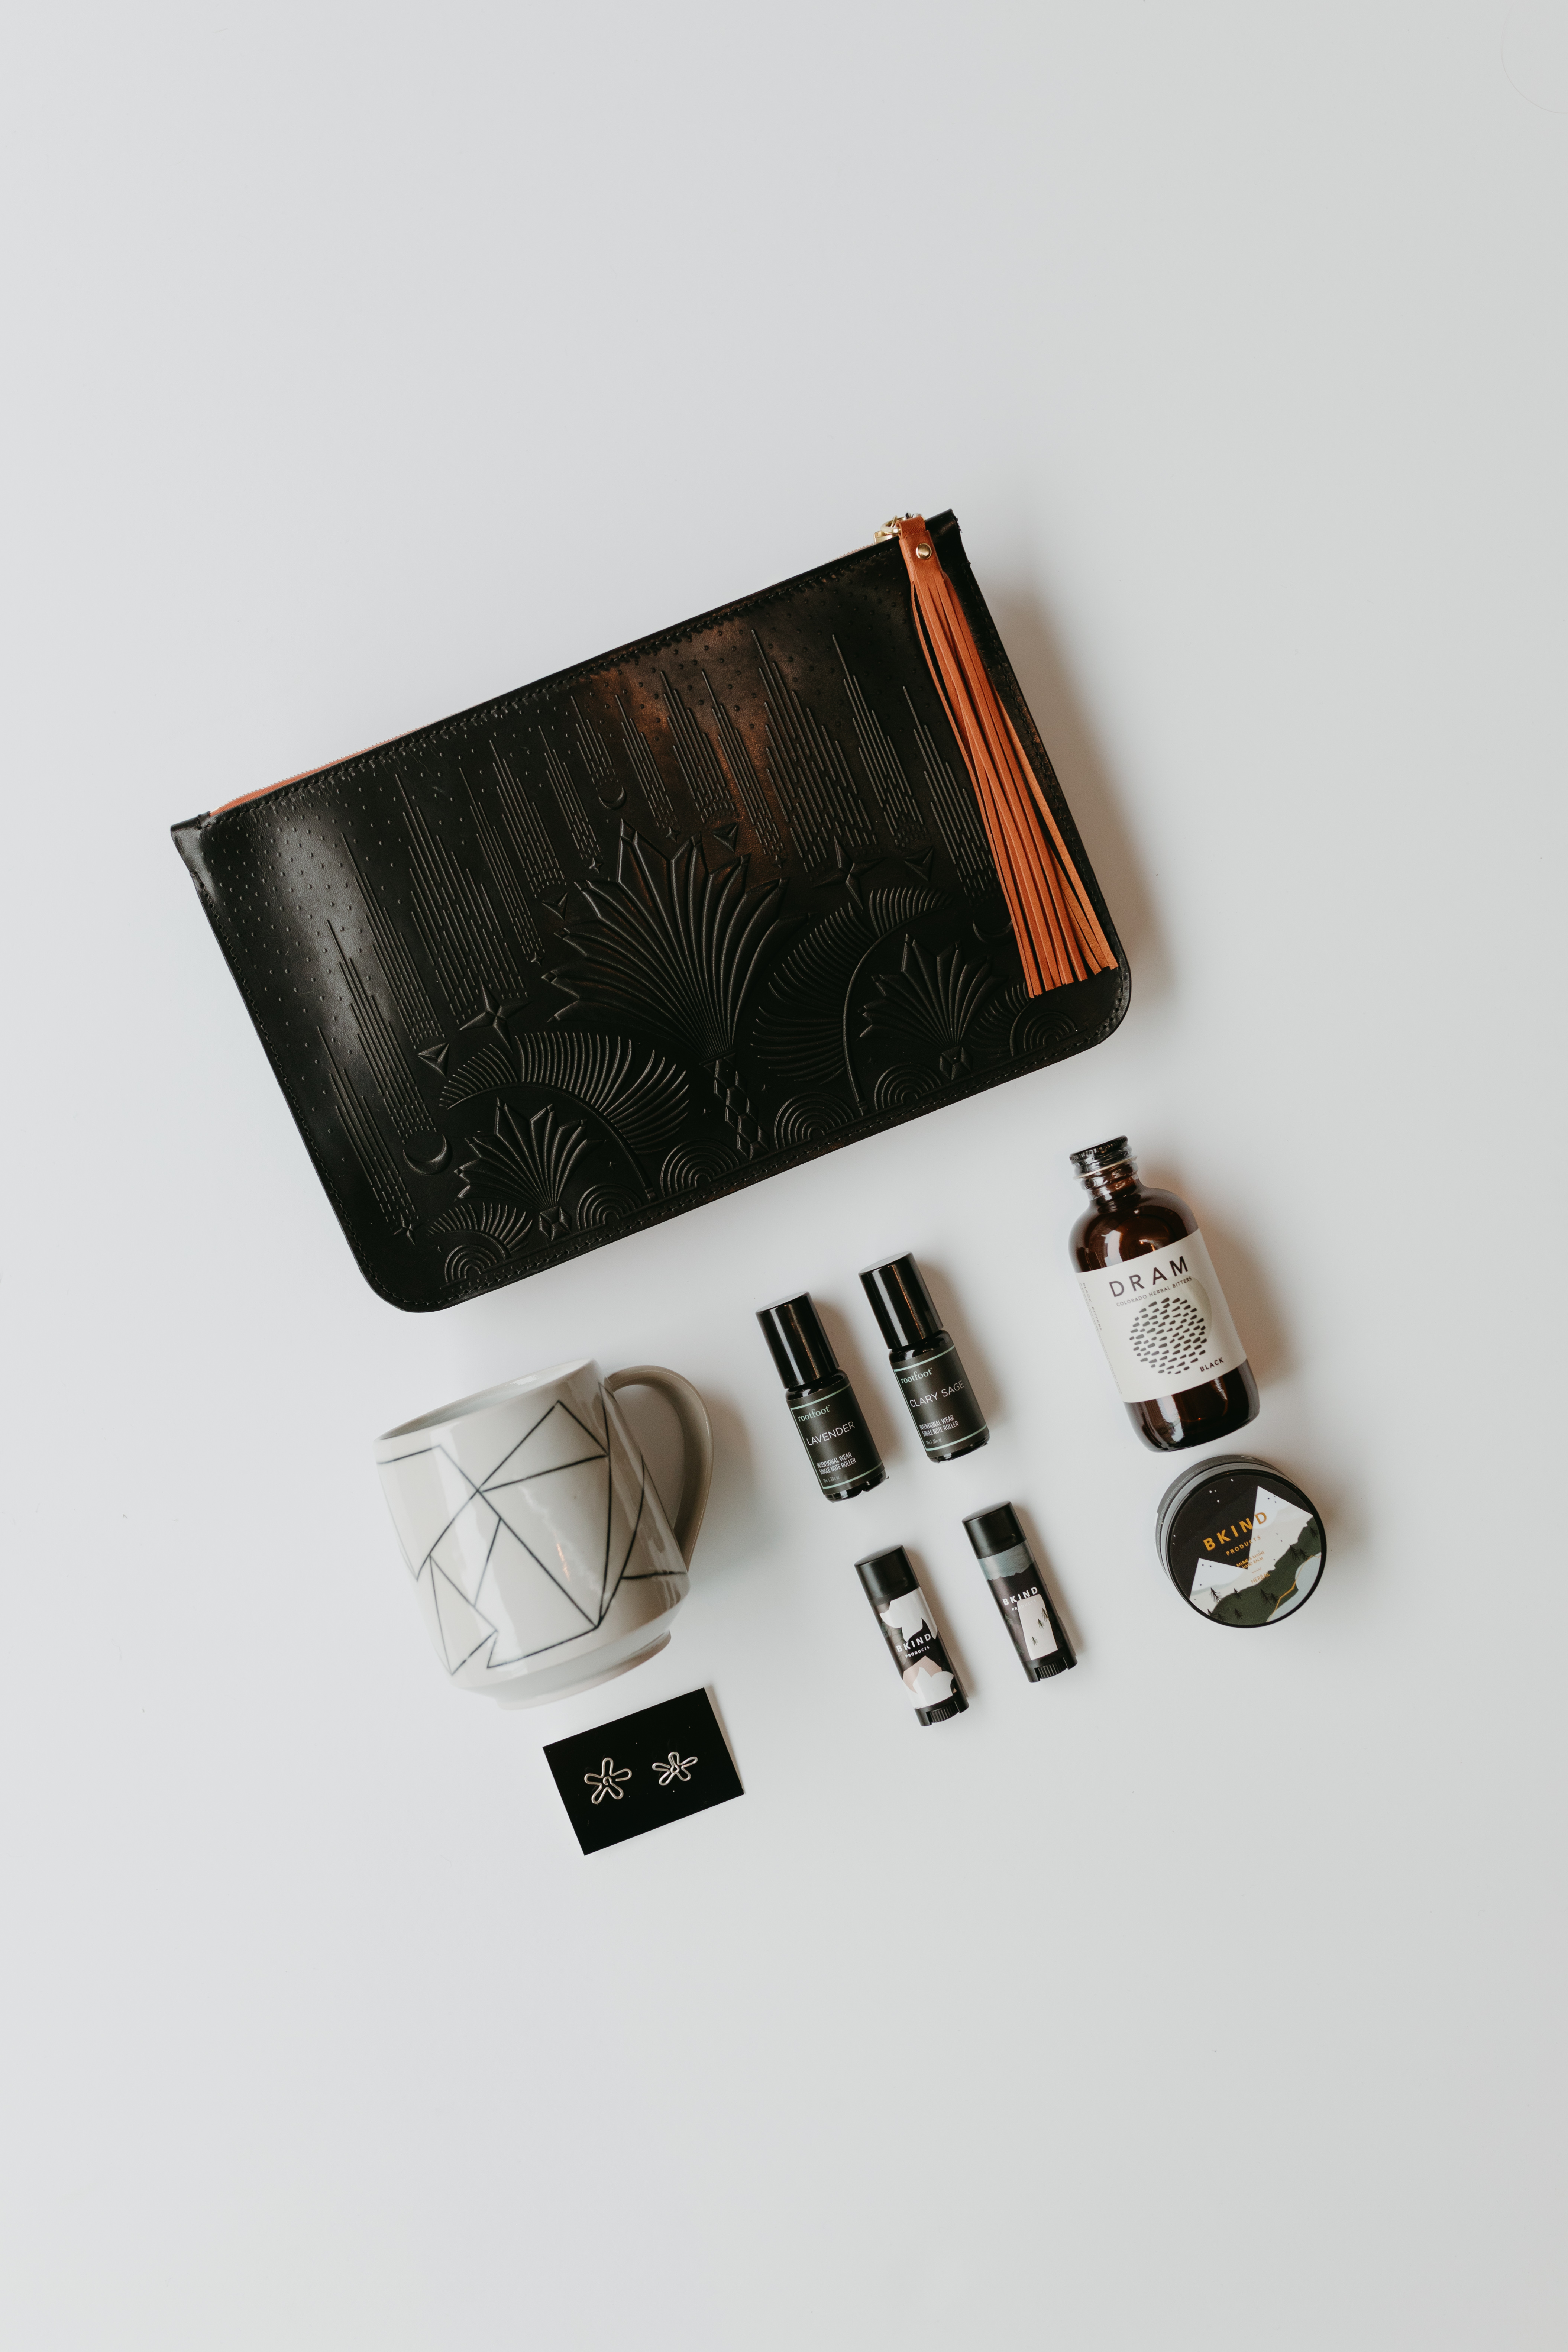 A black leather pouch. A white mug with geometrical patters. A pair of silver floral wire earrings. A bottle of bitters from DRAM. Hand balm and chapstick from B KIND. Fragrance roller from rootfoot in lavender and clary sage. 